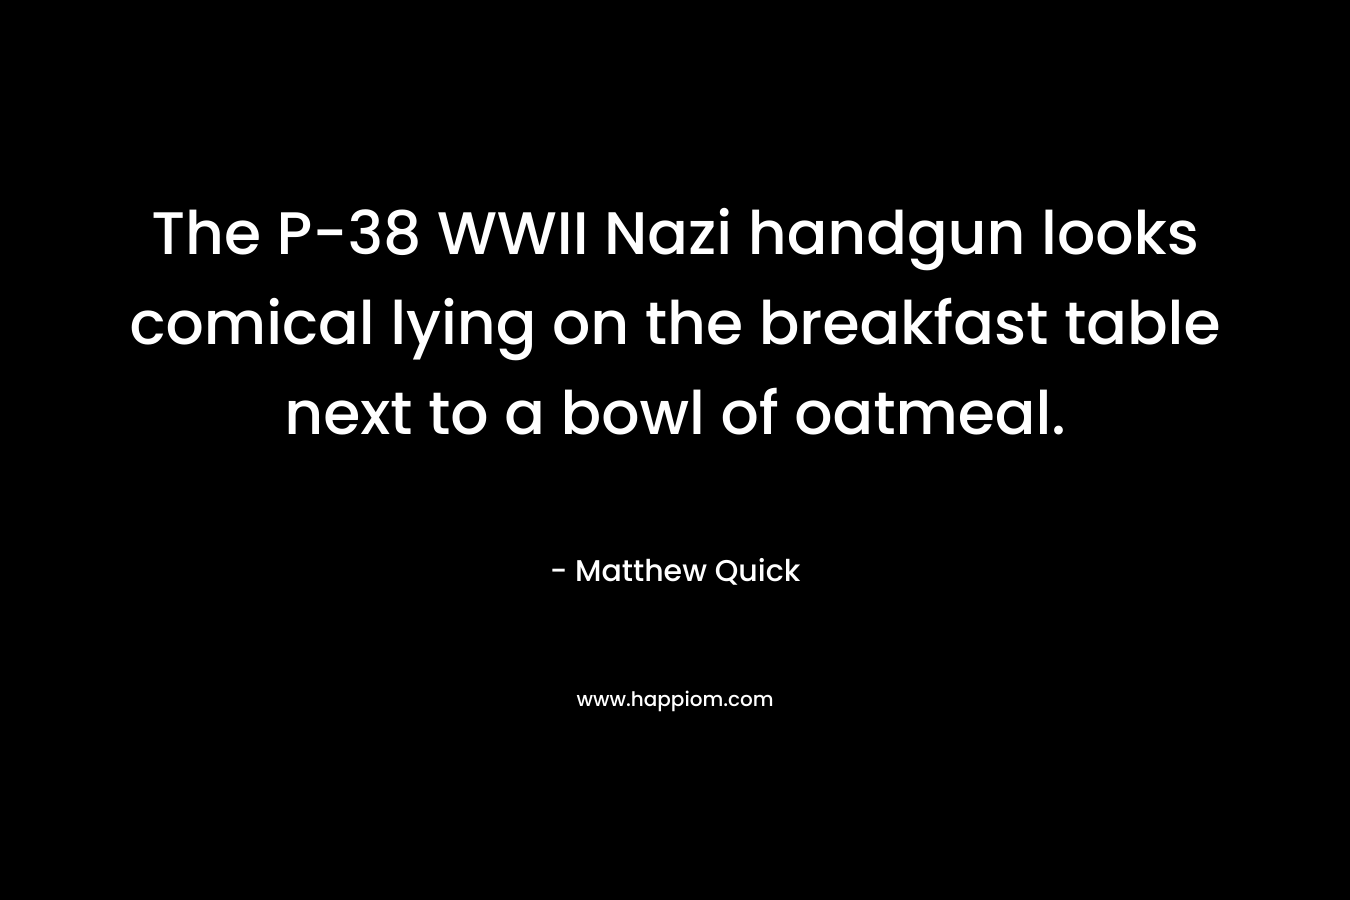 The P-38 WWII Nazi handgun looks comical lying on the breakfast table next to a bowl of oatmeal.